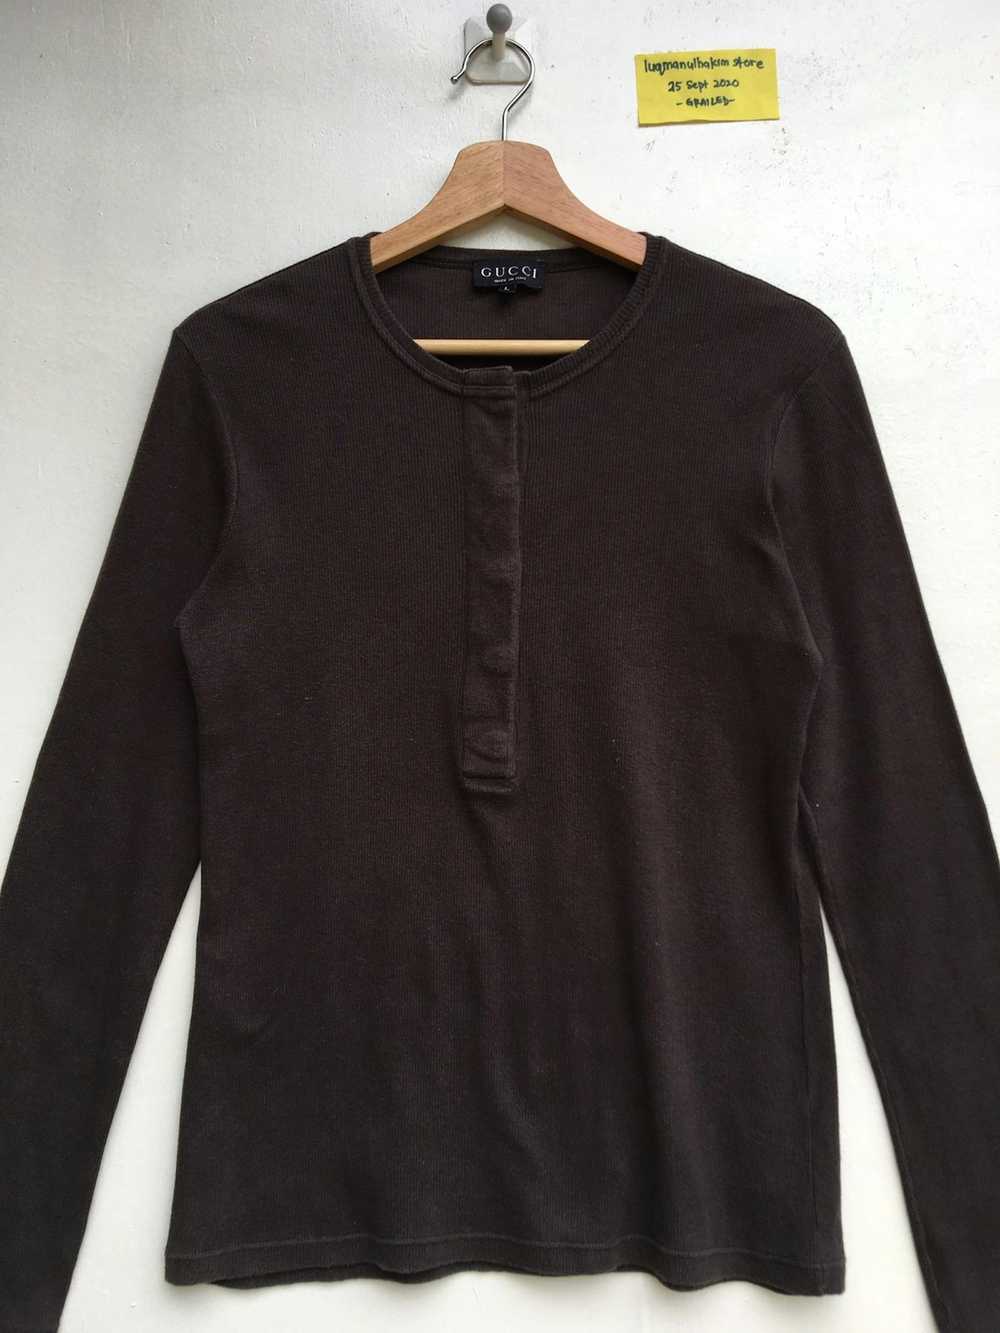 Gucci Vintage 90s Gucci Longsleeve Button Up Shirt - image 4